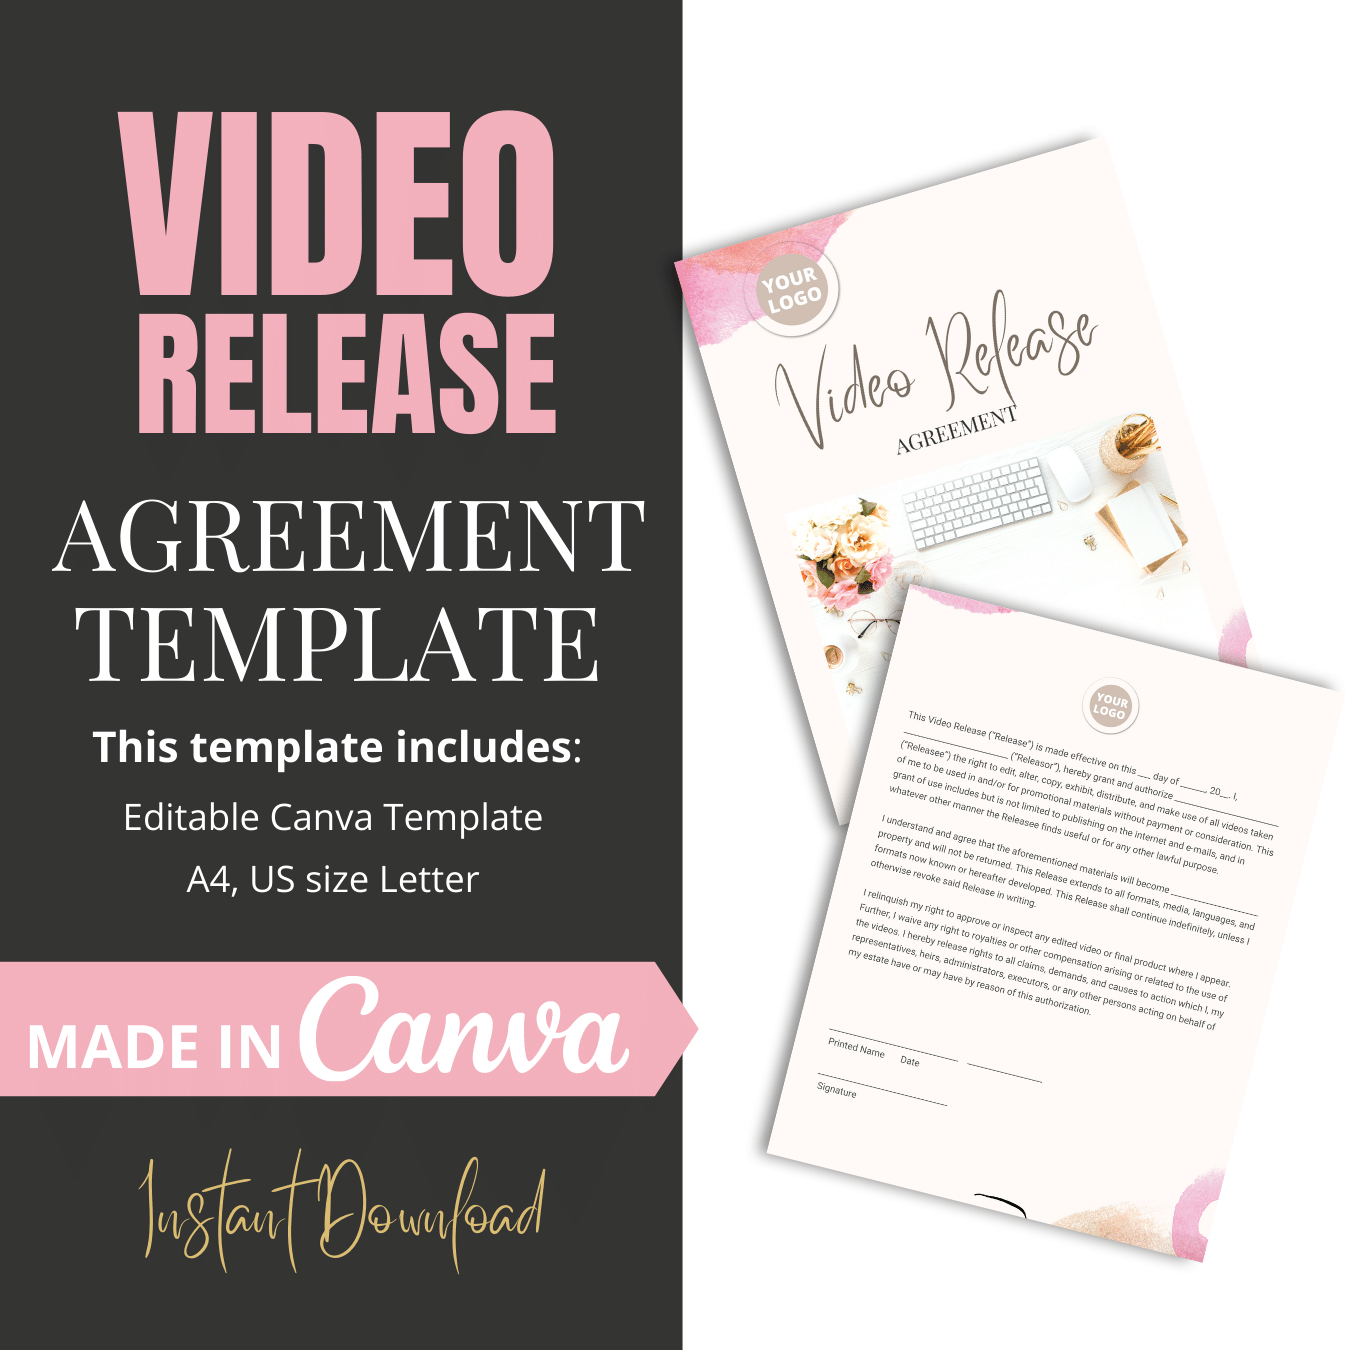 Video Release Agreement